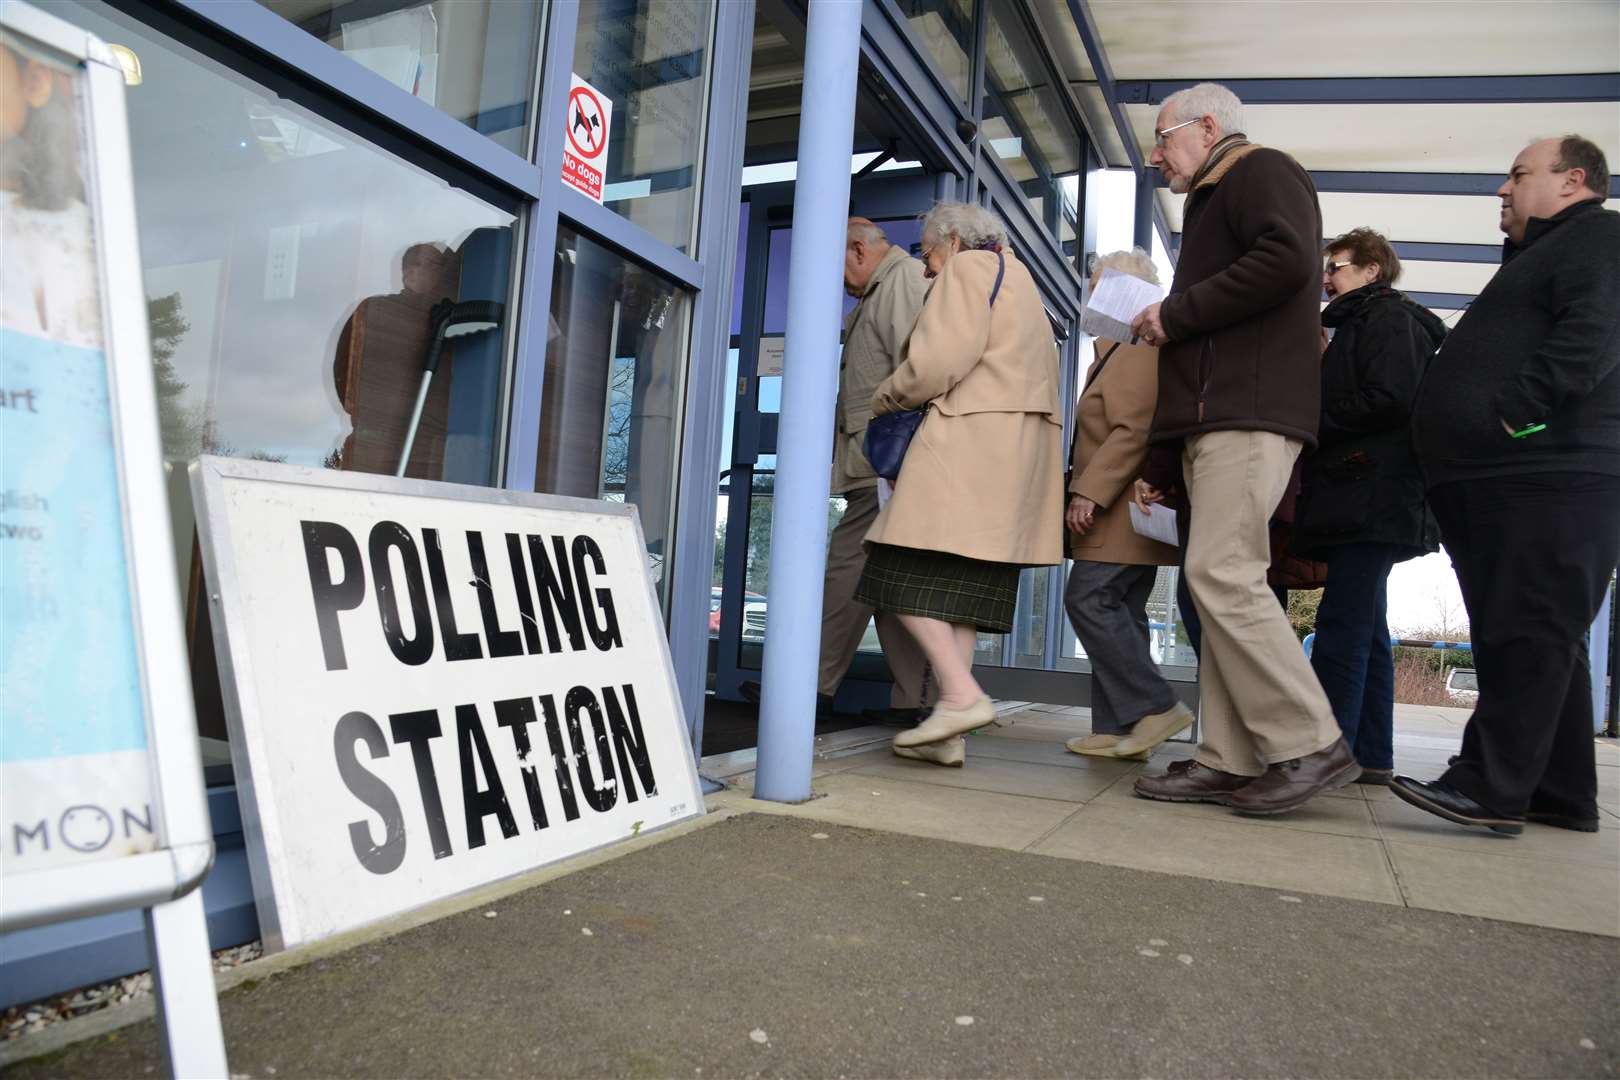 Voters queuing to enter the polling station